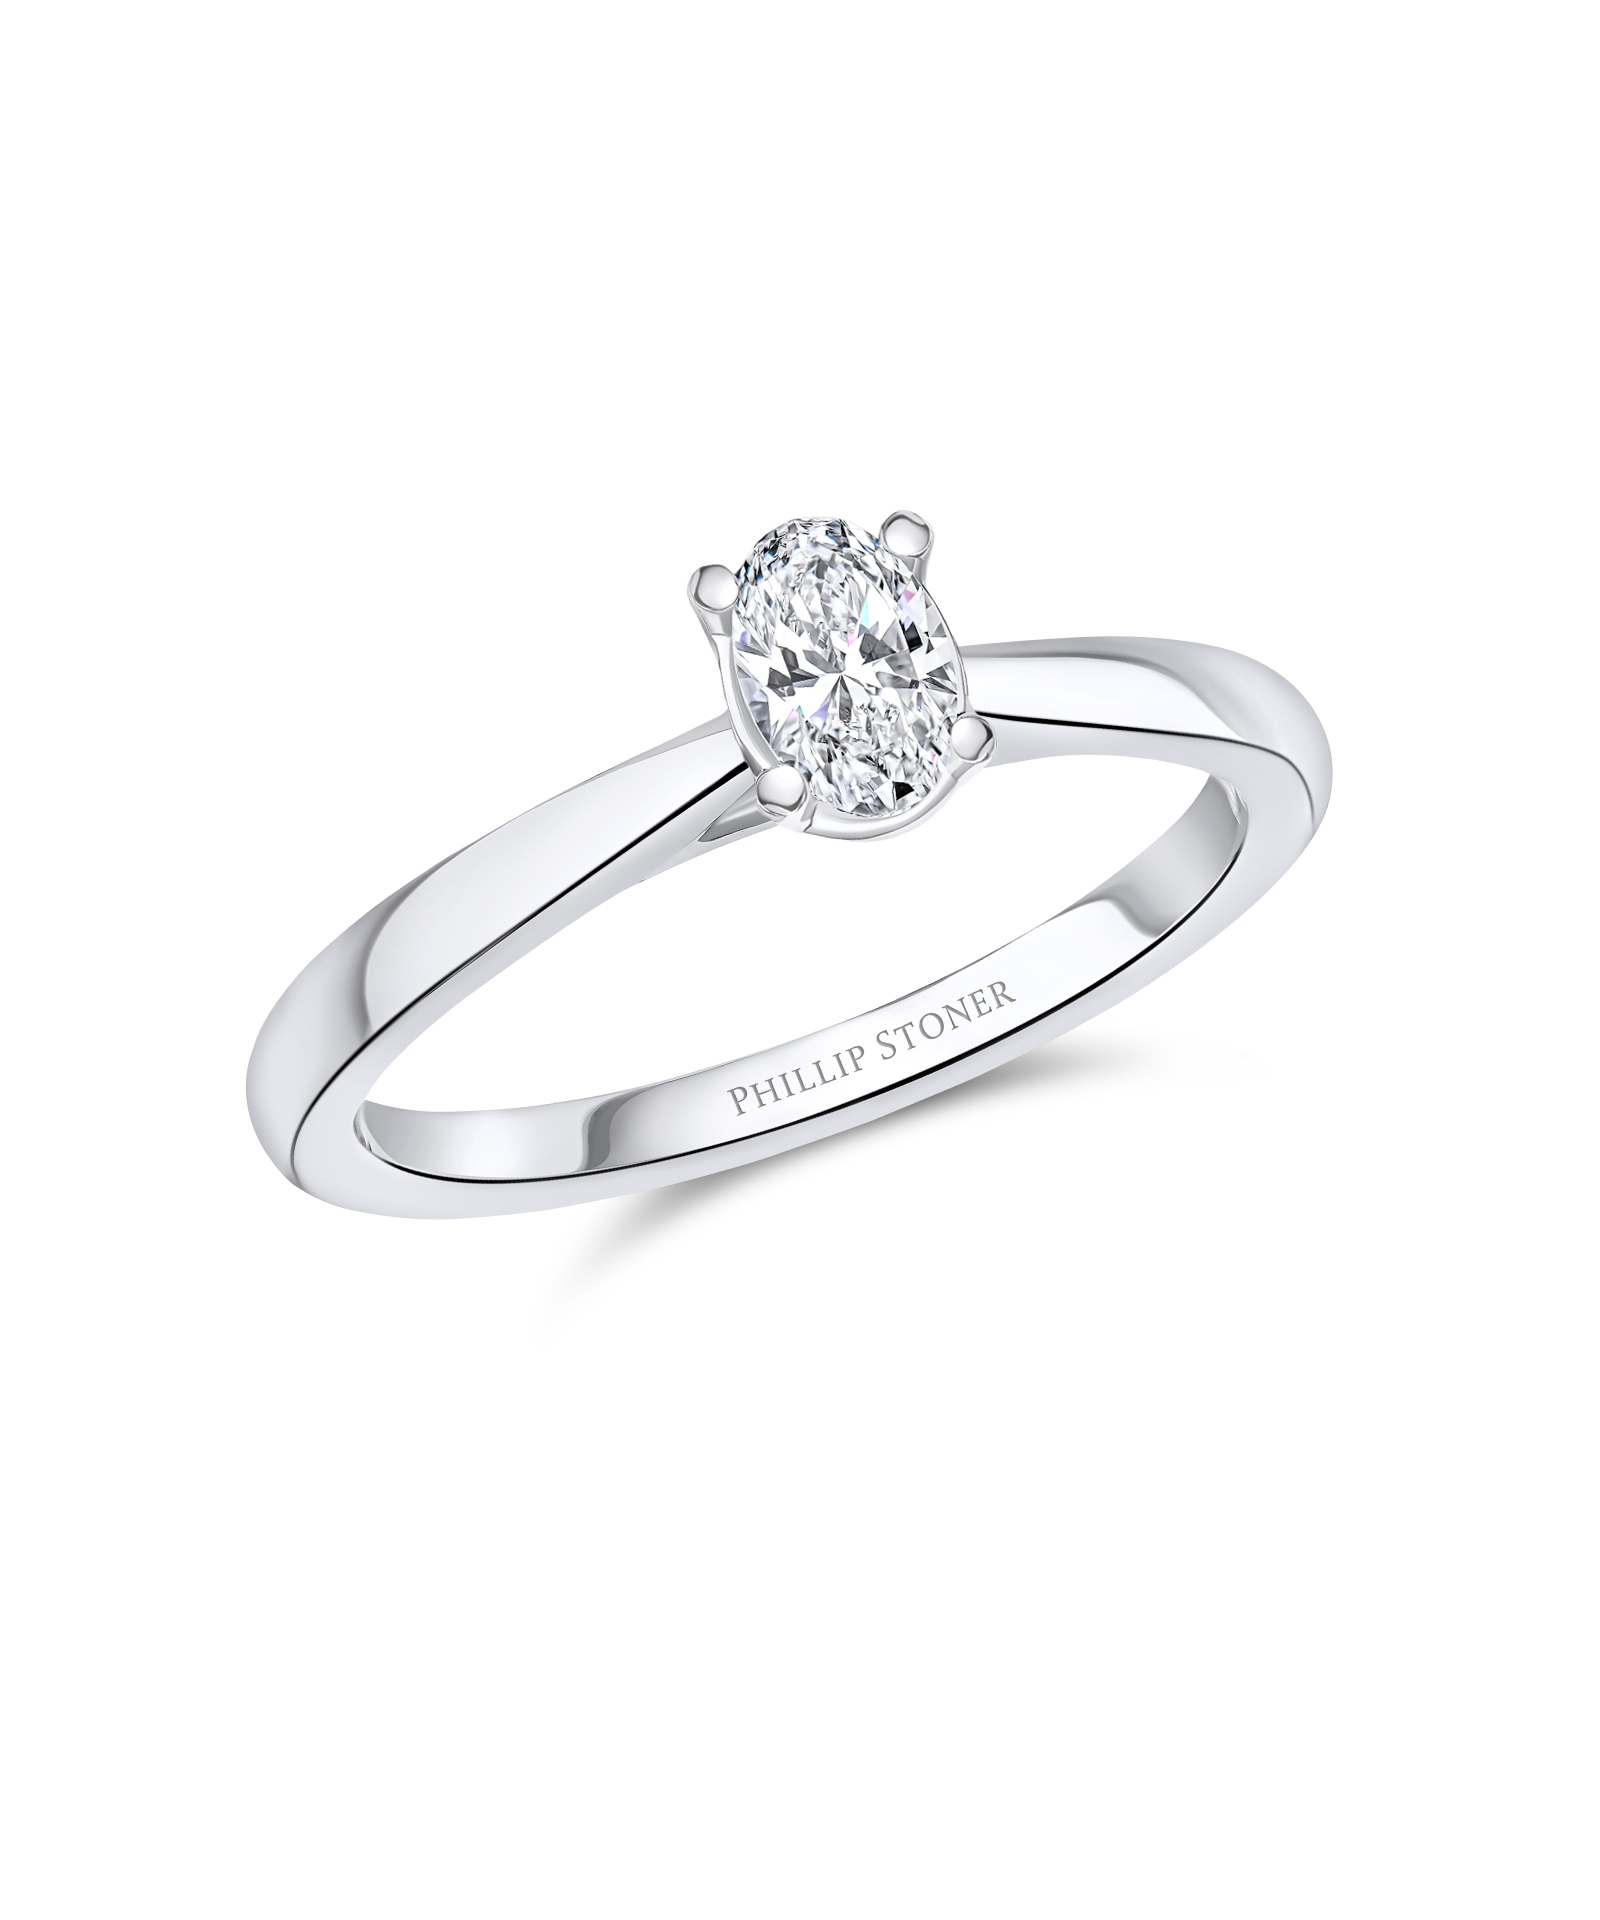 0.30ct Oval Cut Diamond Solitaire Engagement Ring - Phillip Stoner The Jeweller